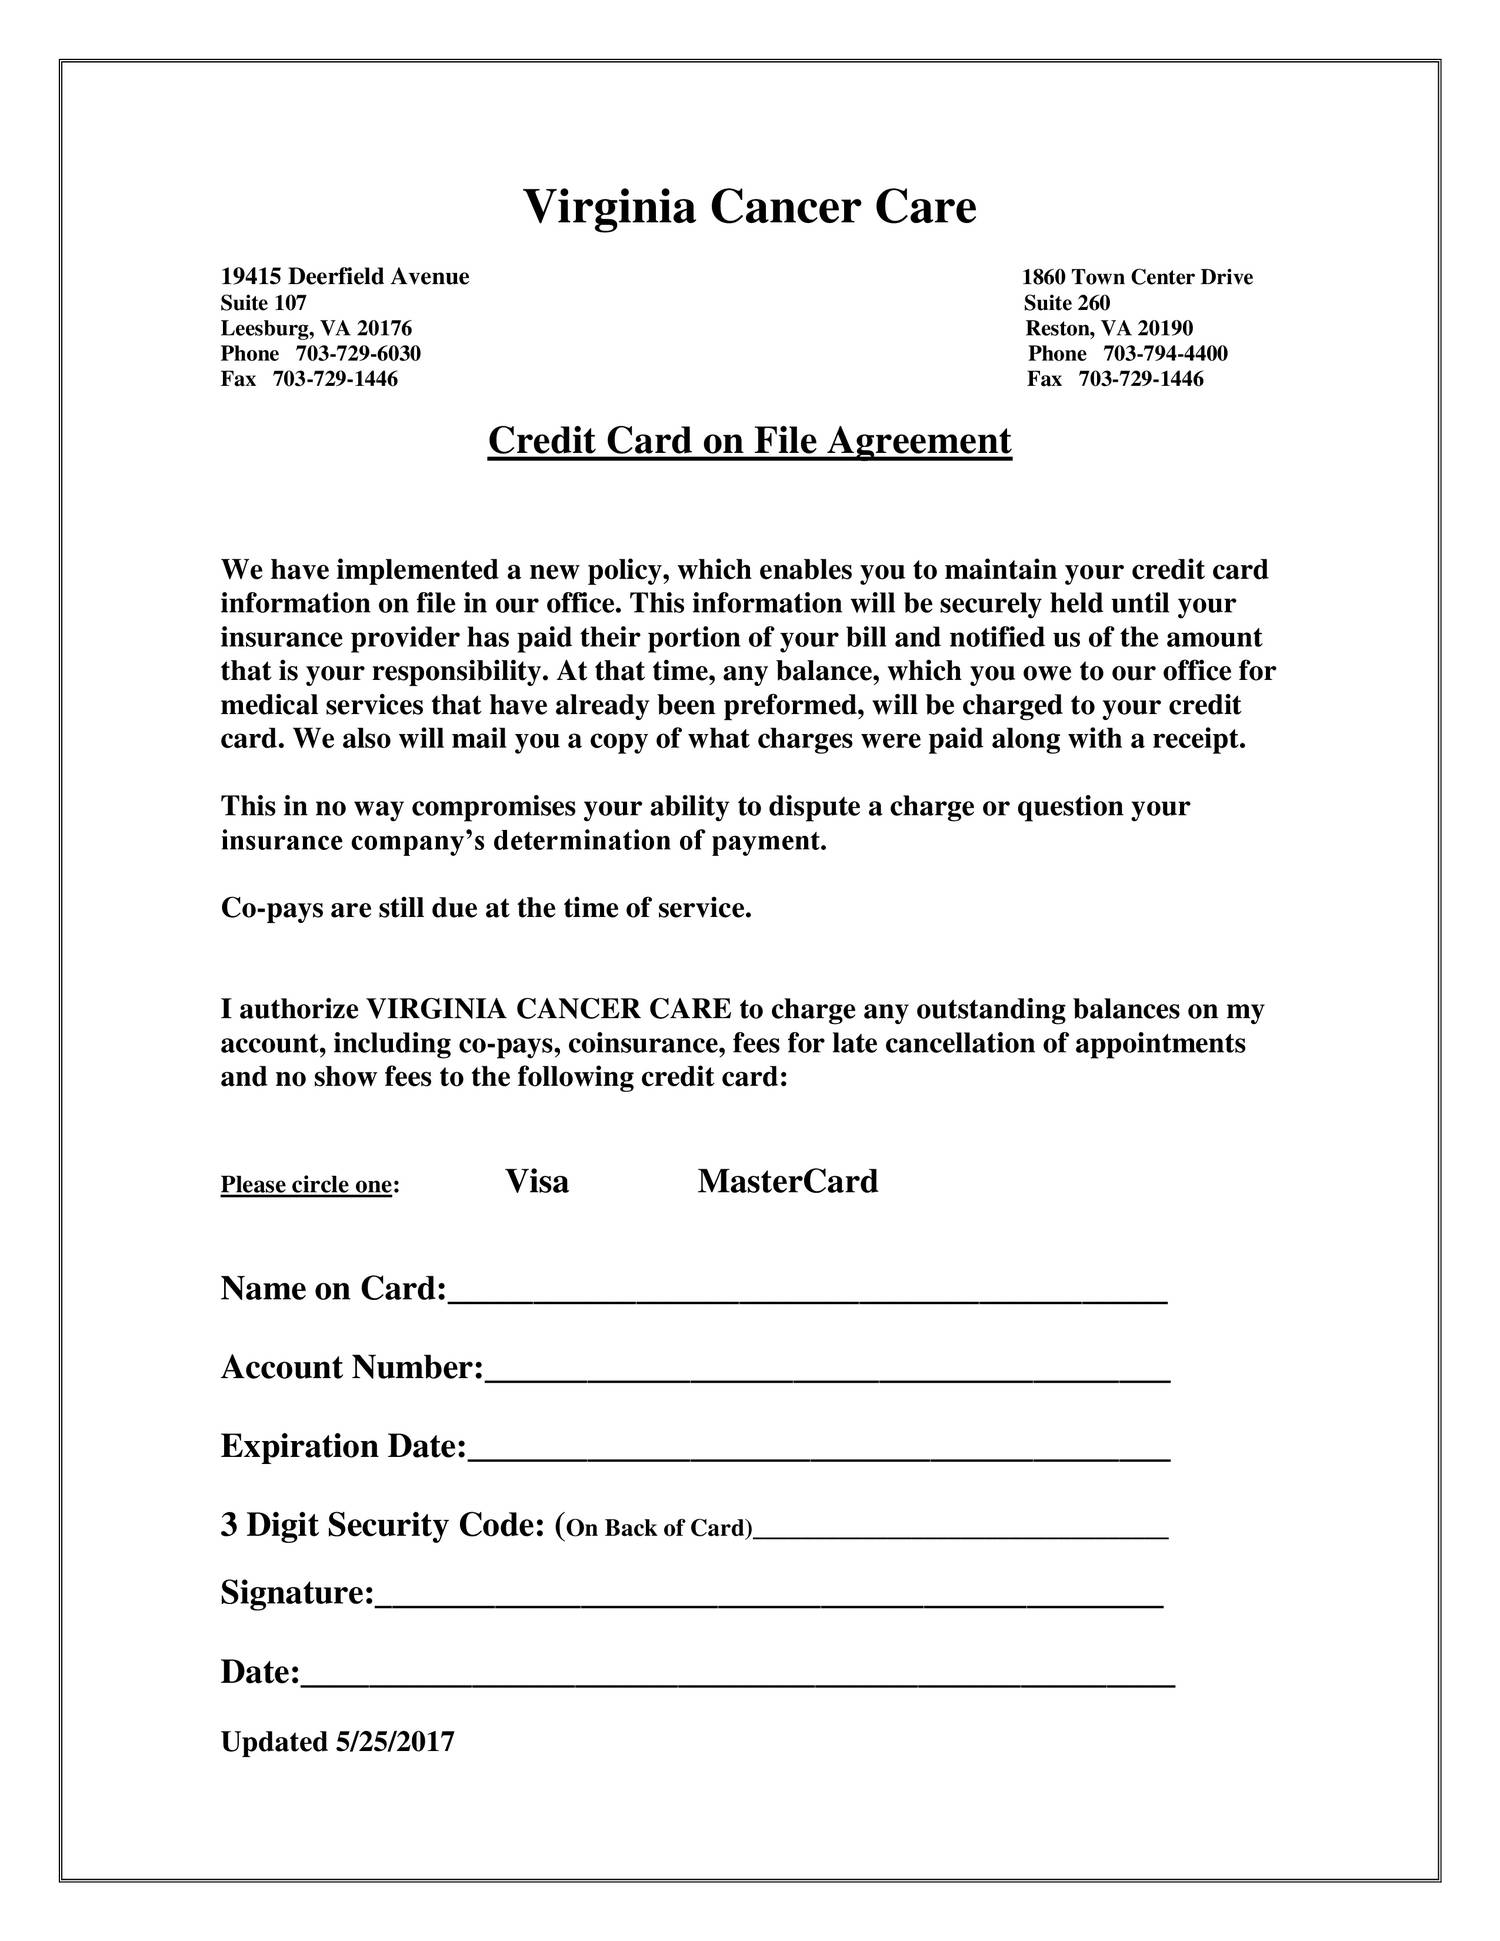 Credit Card on File Agreement.pdf  DocDroid Intended For Corporate Credit Card Agreement Template